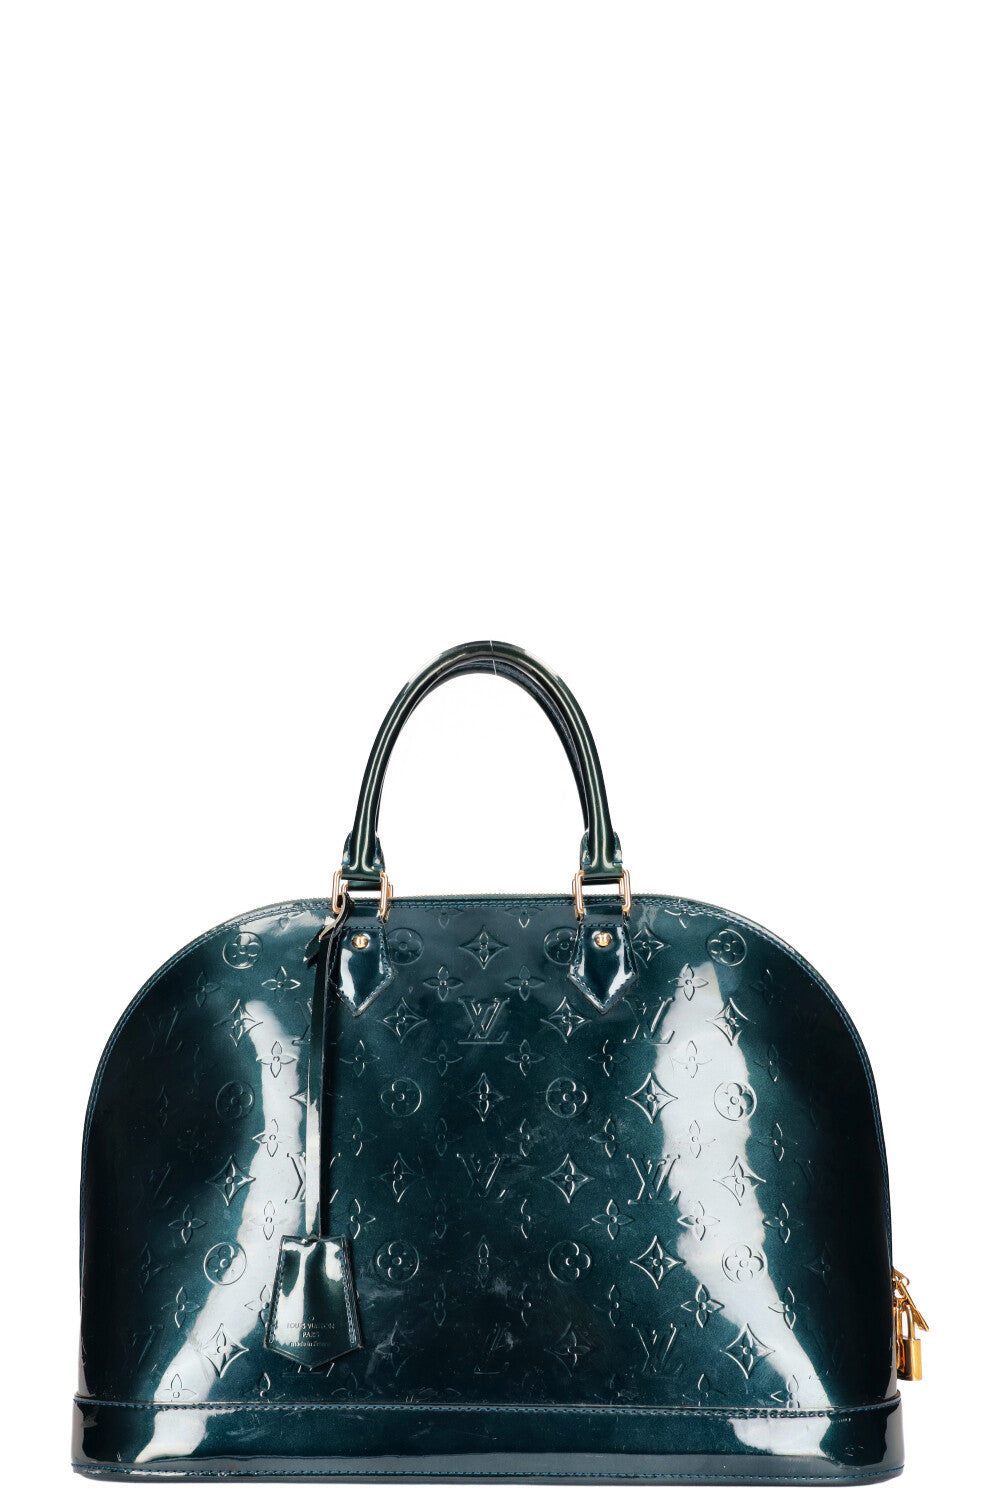 Louis Vuitton Alma Our Full Review LVs Most Ladylike Bag  Luxe Front